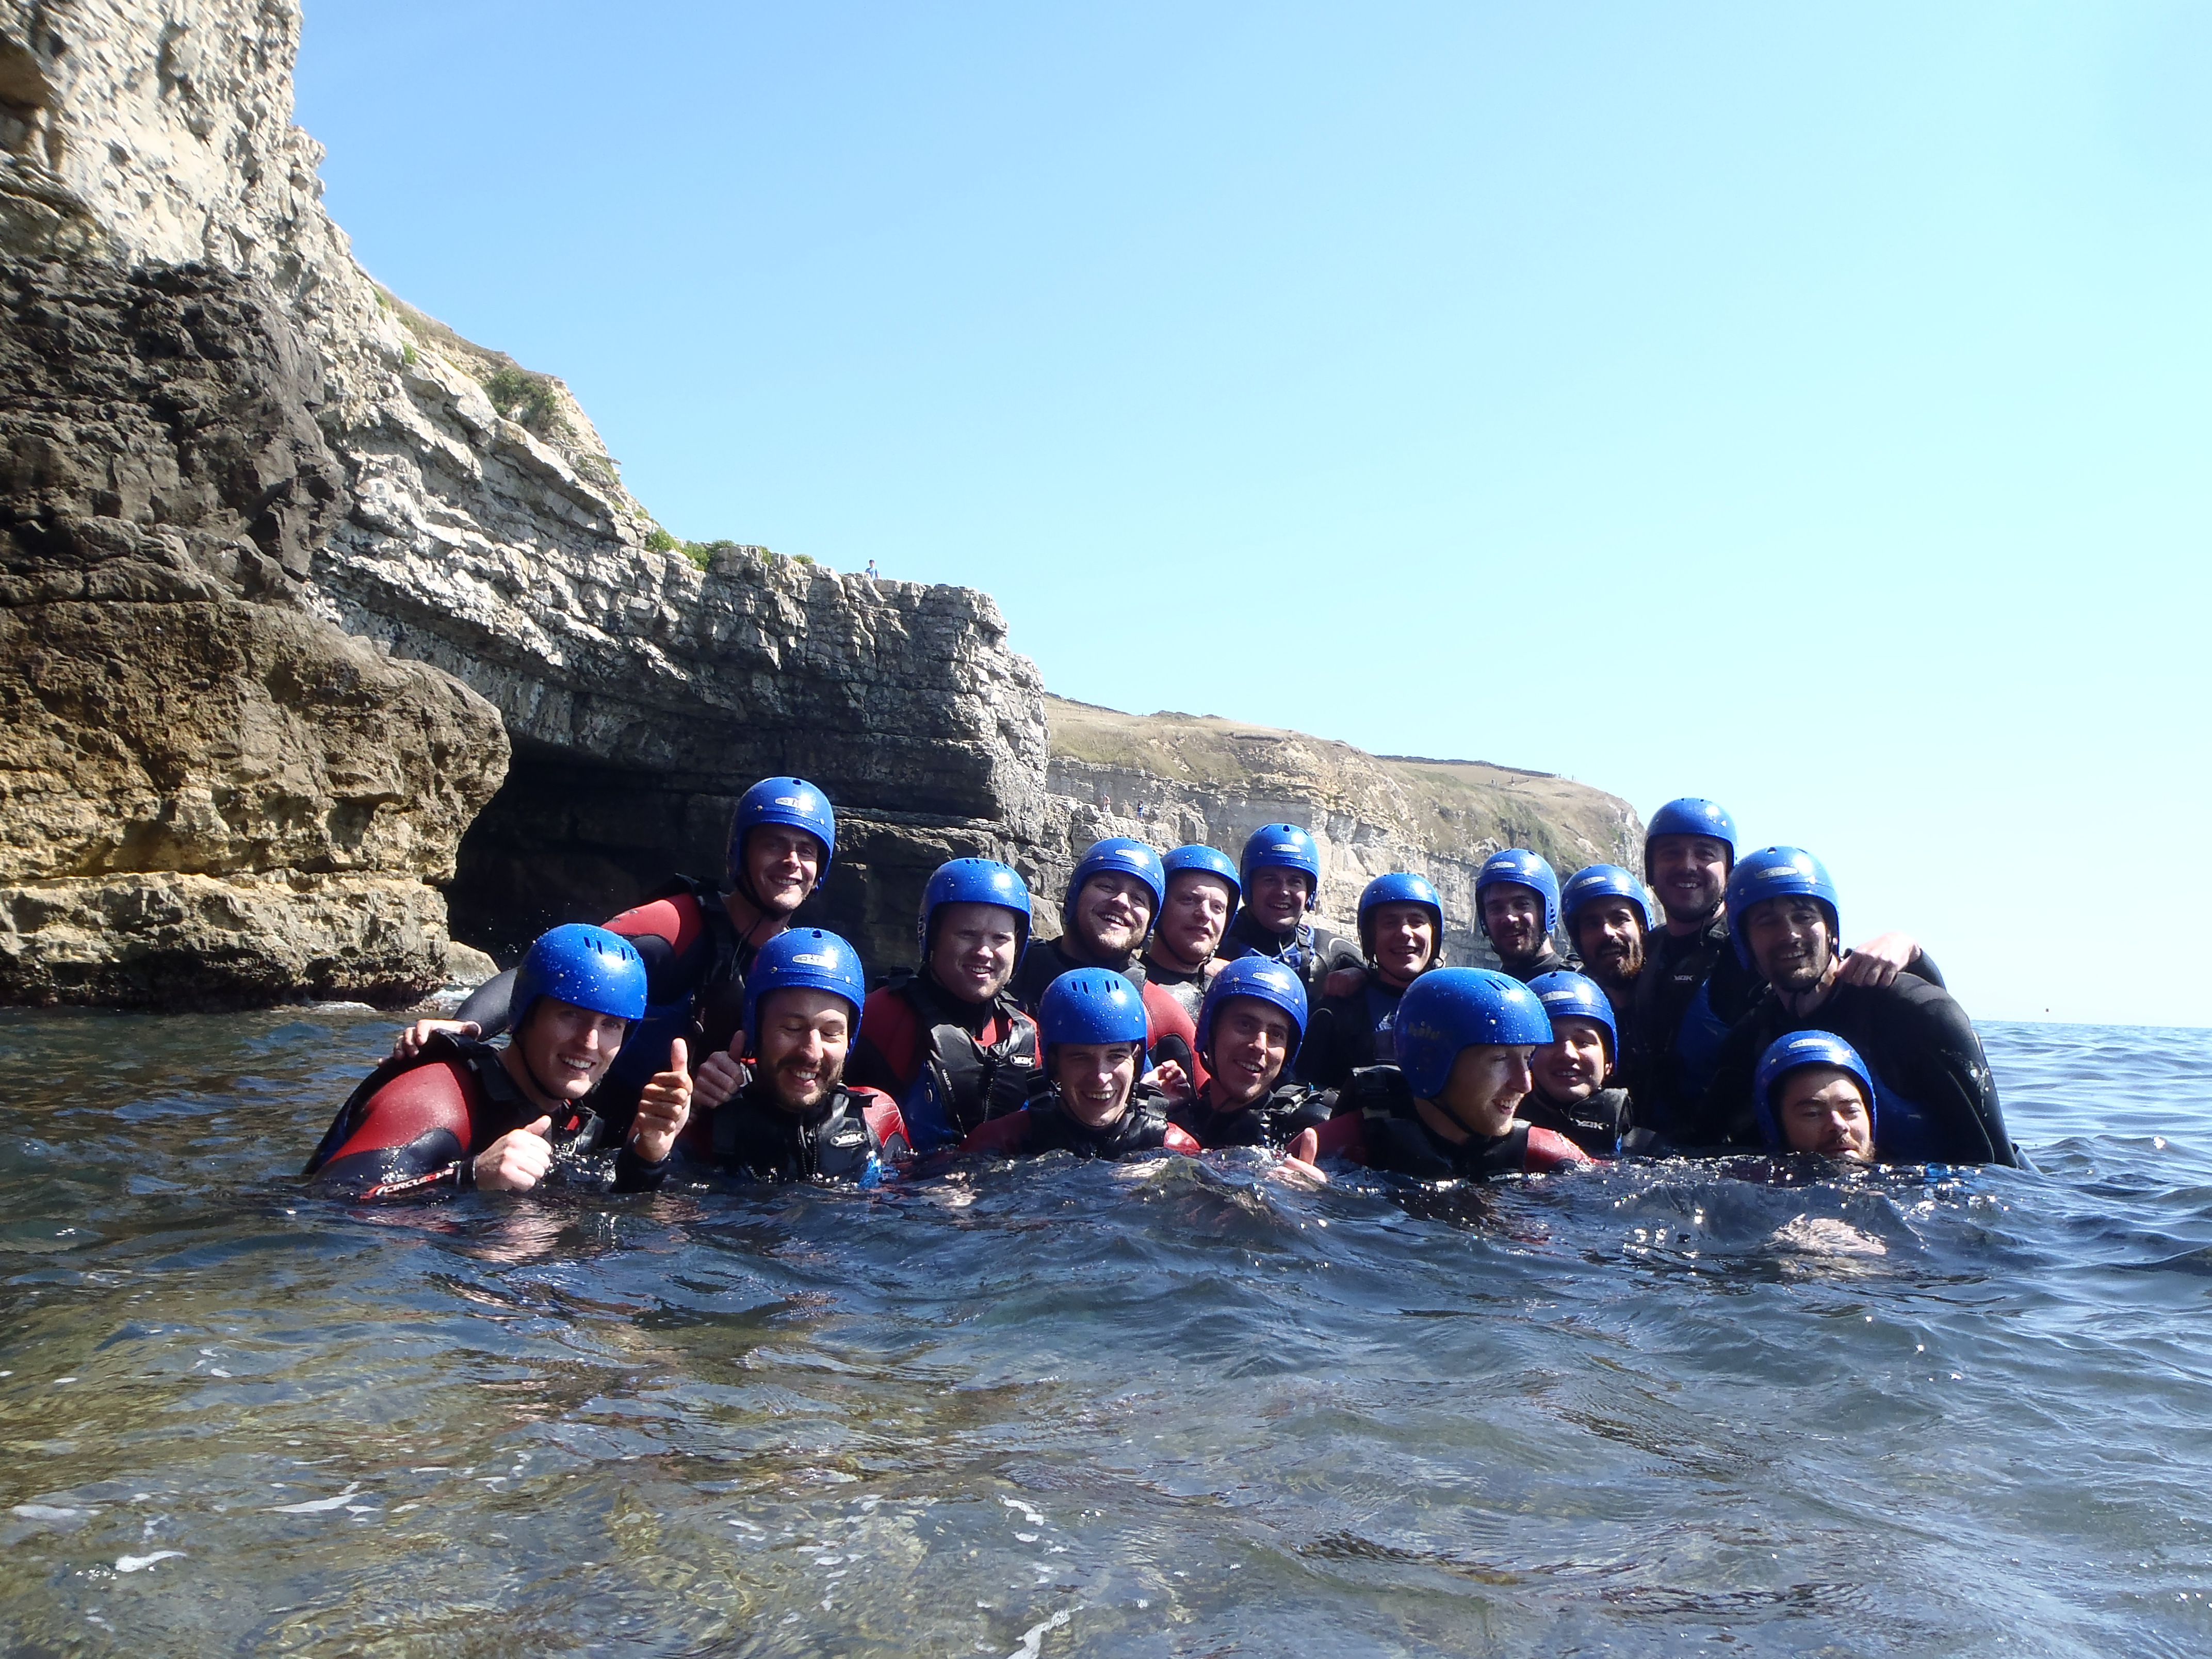 Stag Group coasteering at Dancing Ledge in Dorset